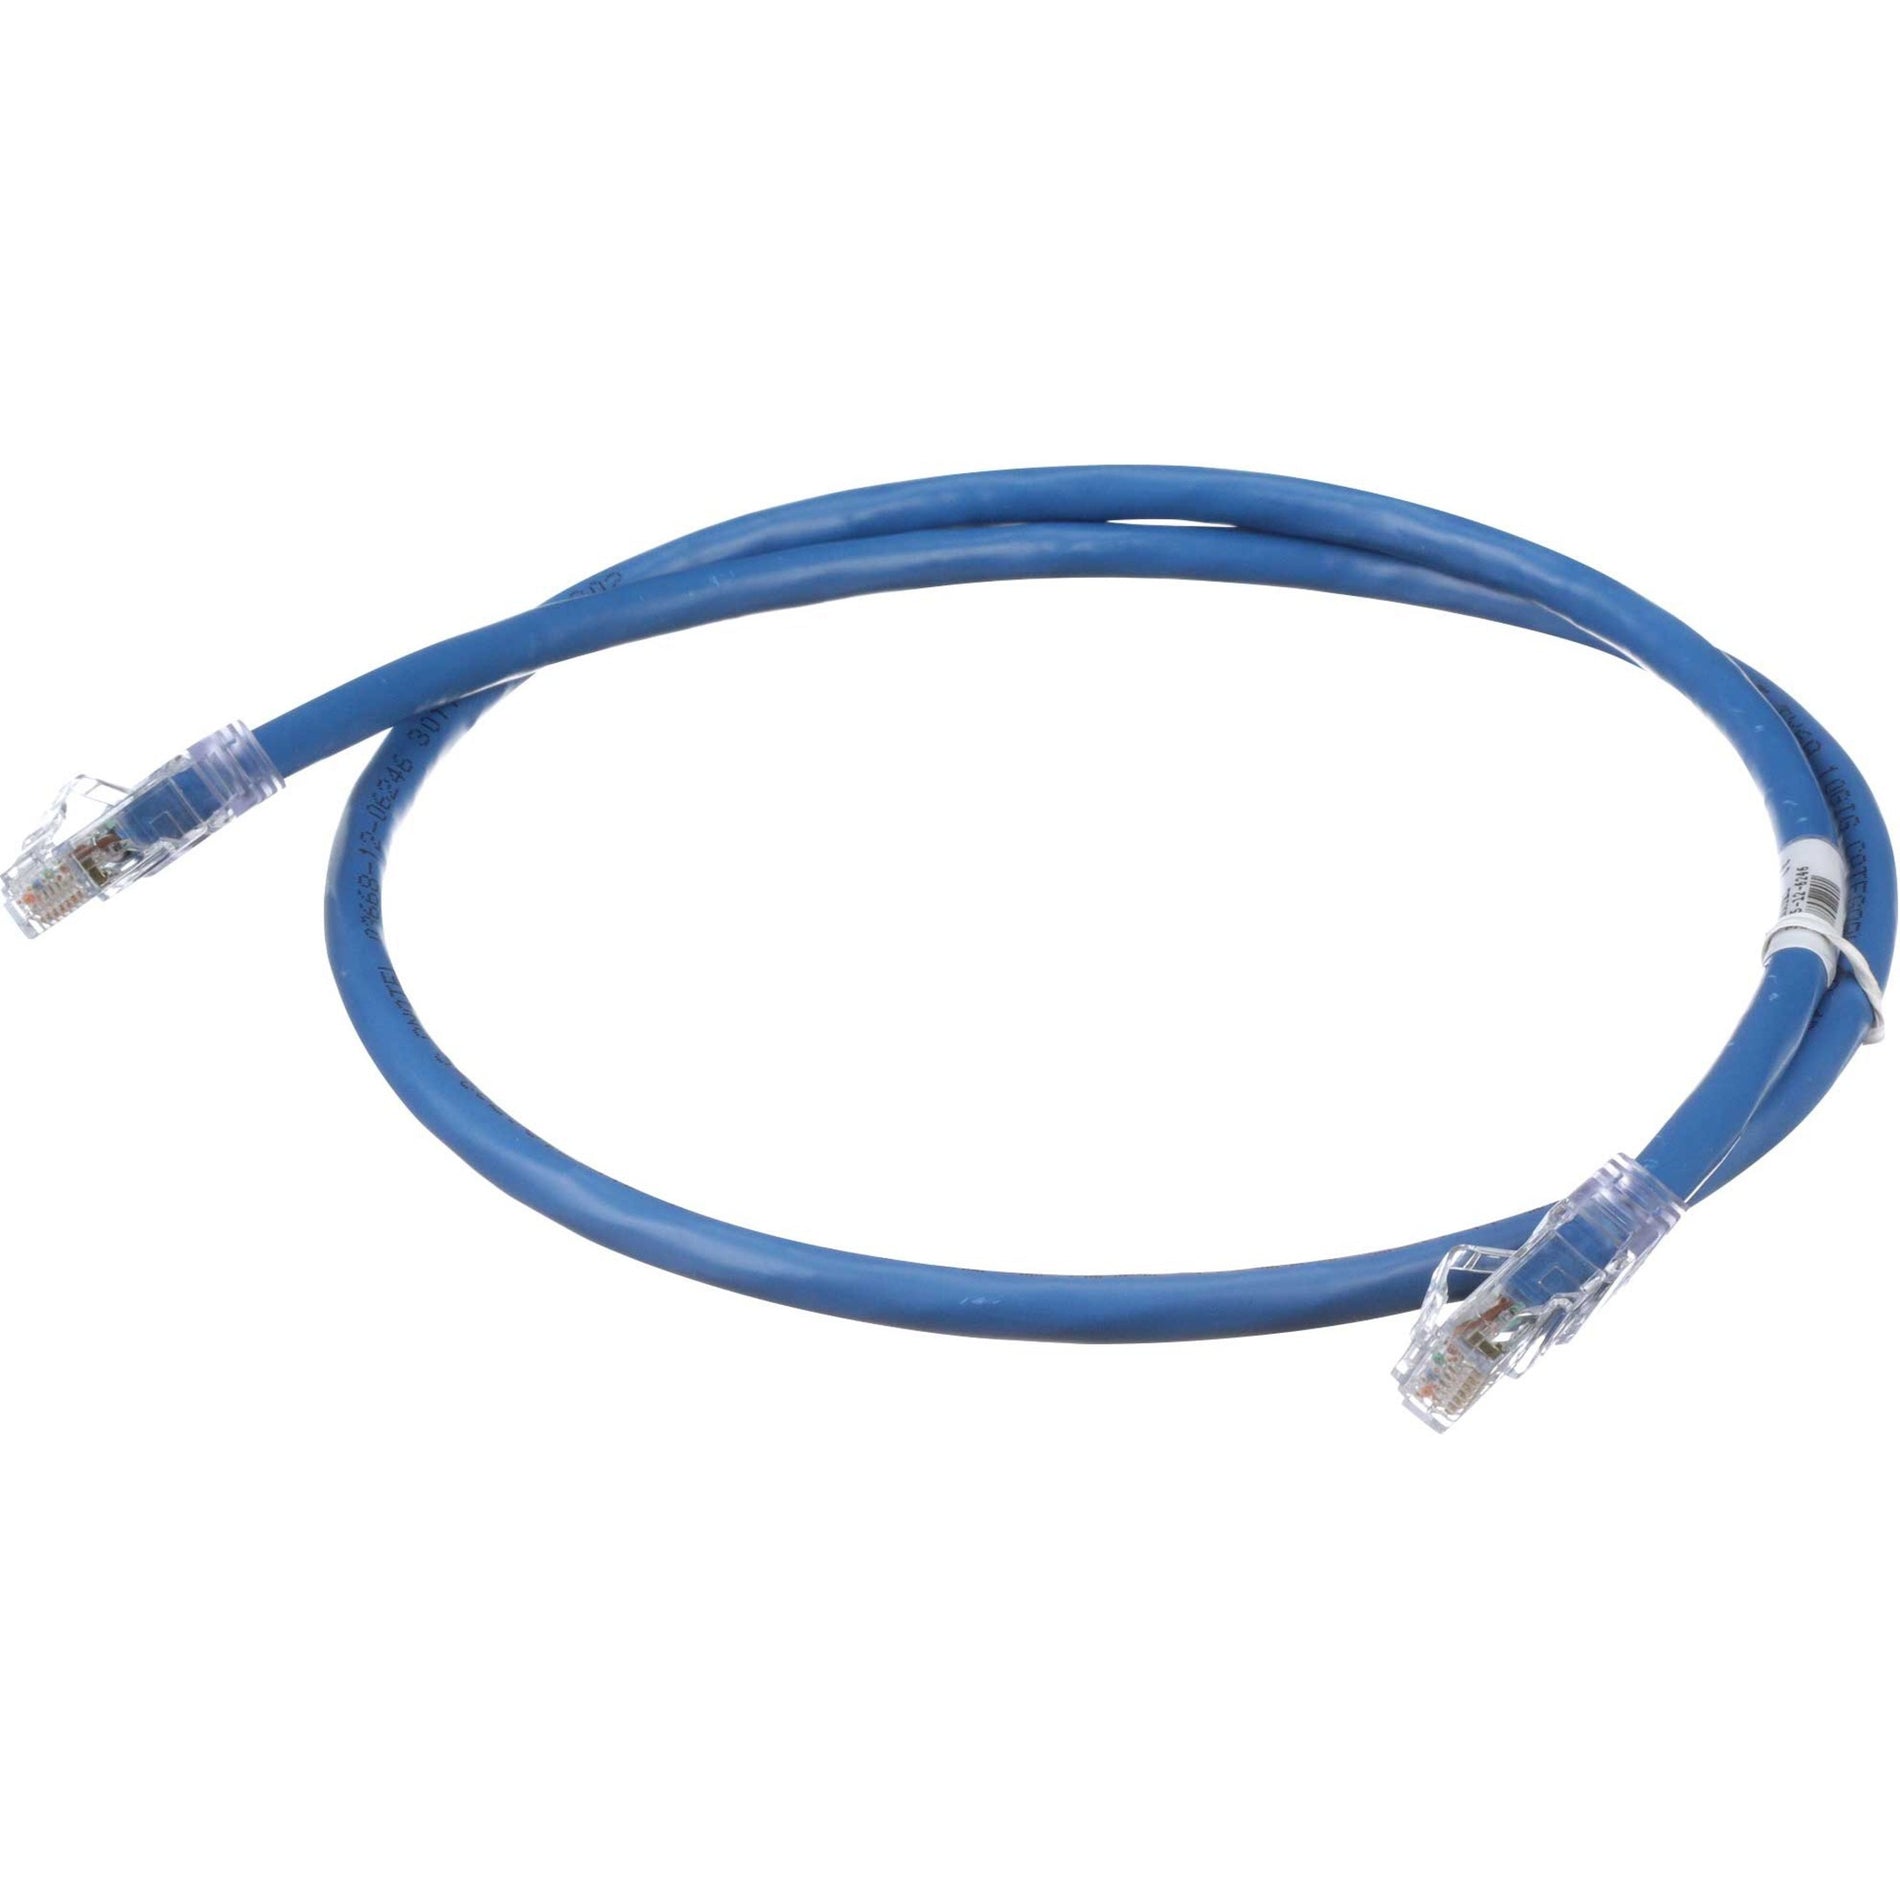 Panduit UTP6AX1 Cat 6A 24 AWG UTP Copper Patch Cord, 1 ft, White, Snag Resistant, Tangle-free, 10 Gbit/s Data Transfer Rate